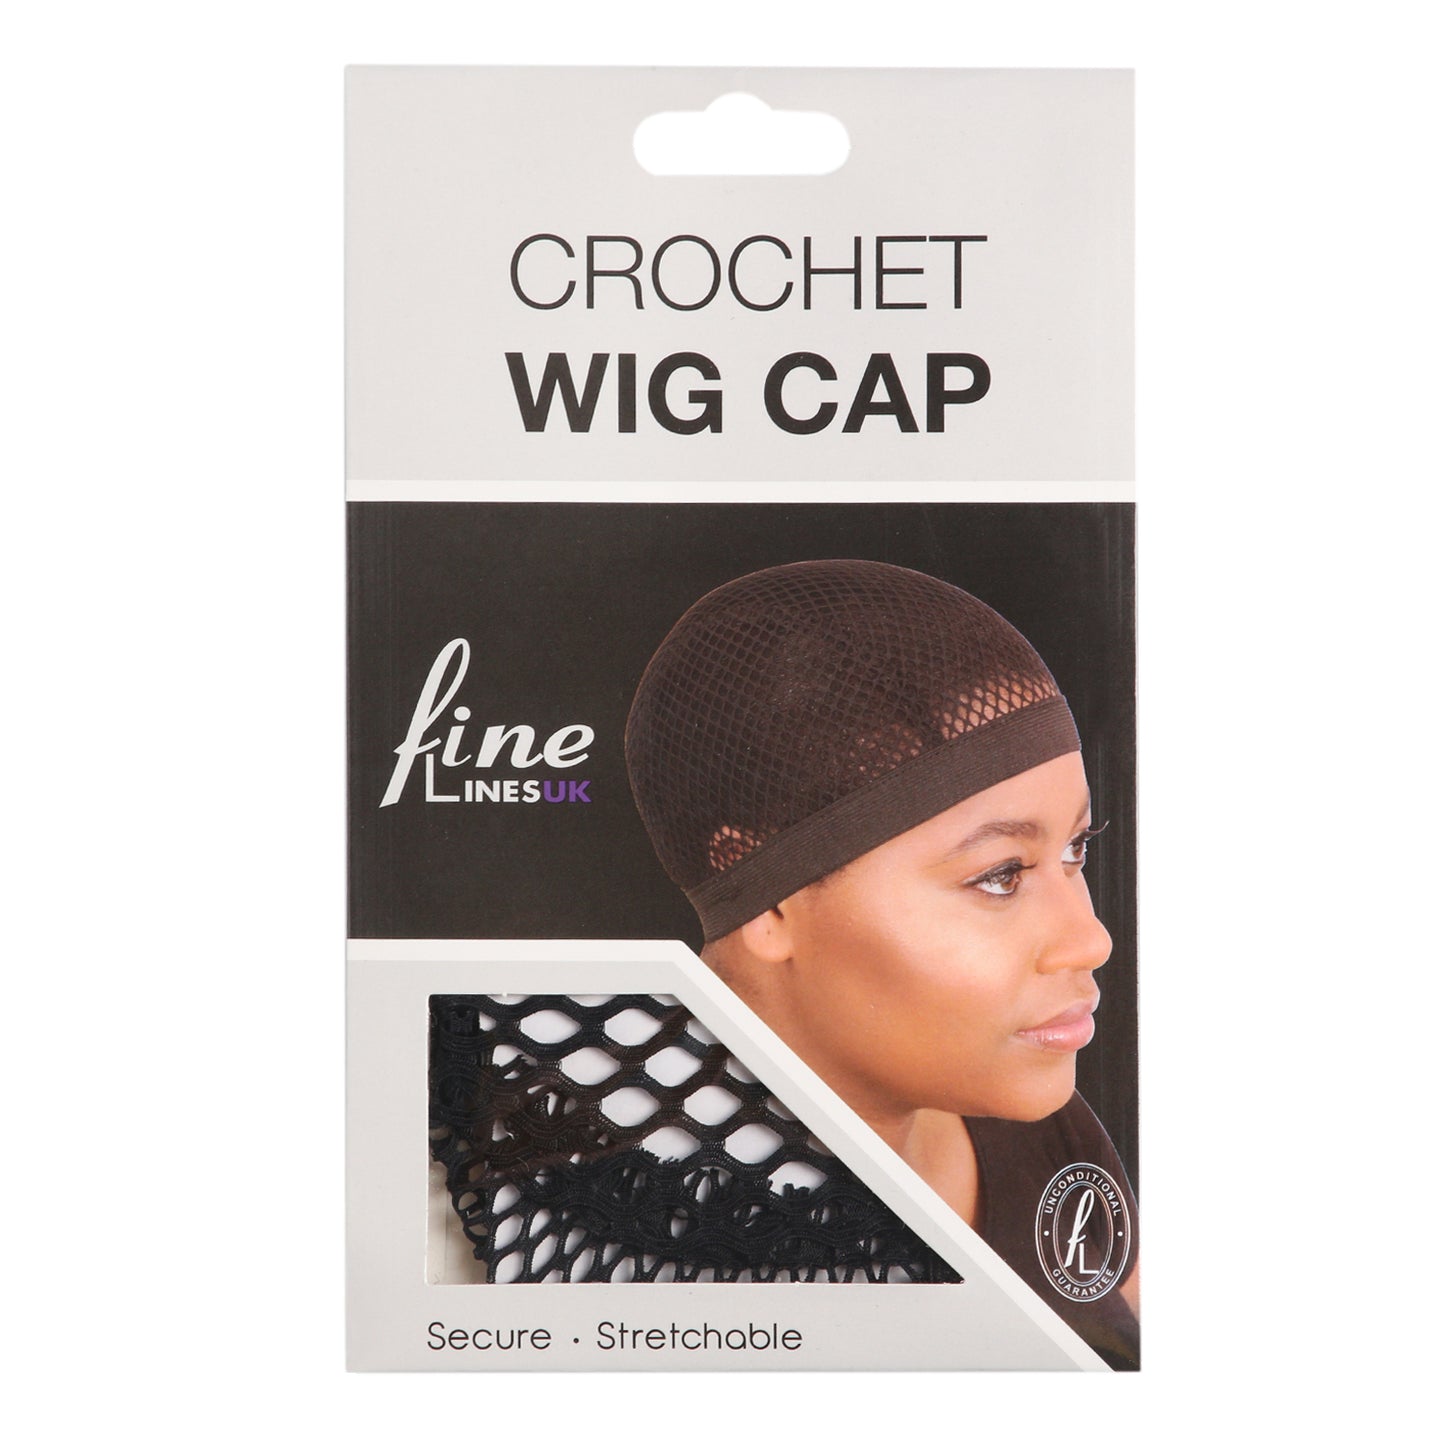 Experience comfort and style with our Cotton Spandex Durag. Made from breathable materials, this durag provides a secure fit and is perfect for maintaining waves or curls.